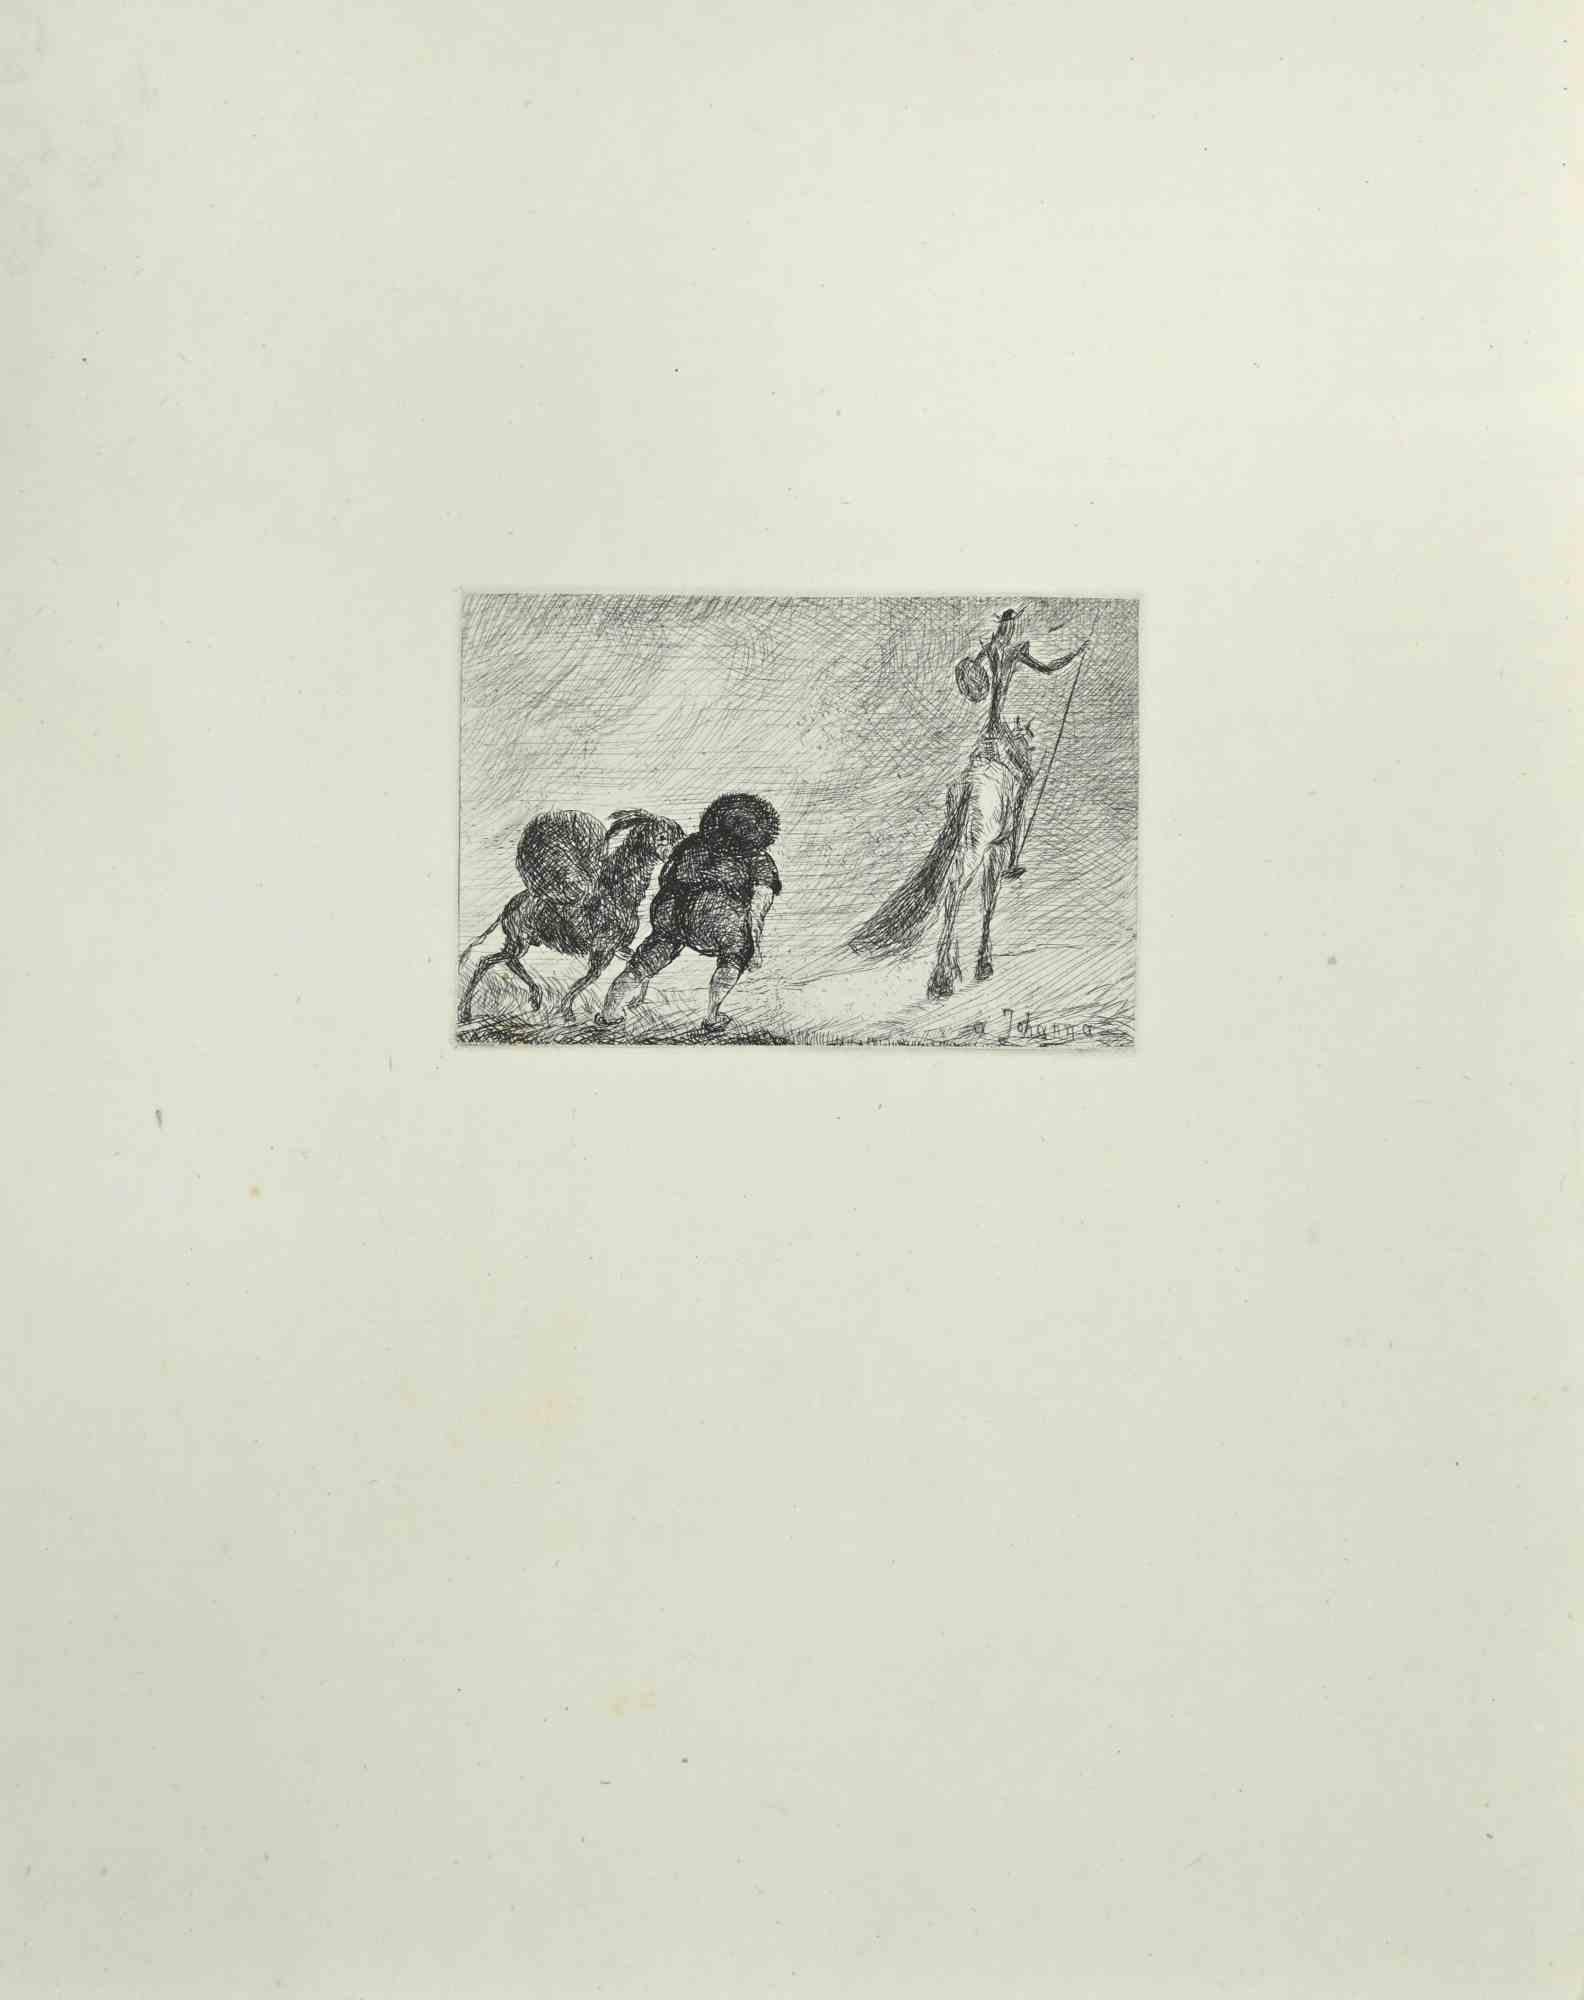 Don Quixote  and Sancho Panza is an etching and drypoint print on ivory-colored China paper, realized by Wladyslaw Jahl in 1951.

It belongs to a limited edition of 125 specimens.

Good conditions.

The artwork represents a visual scene from Don